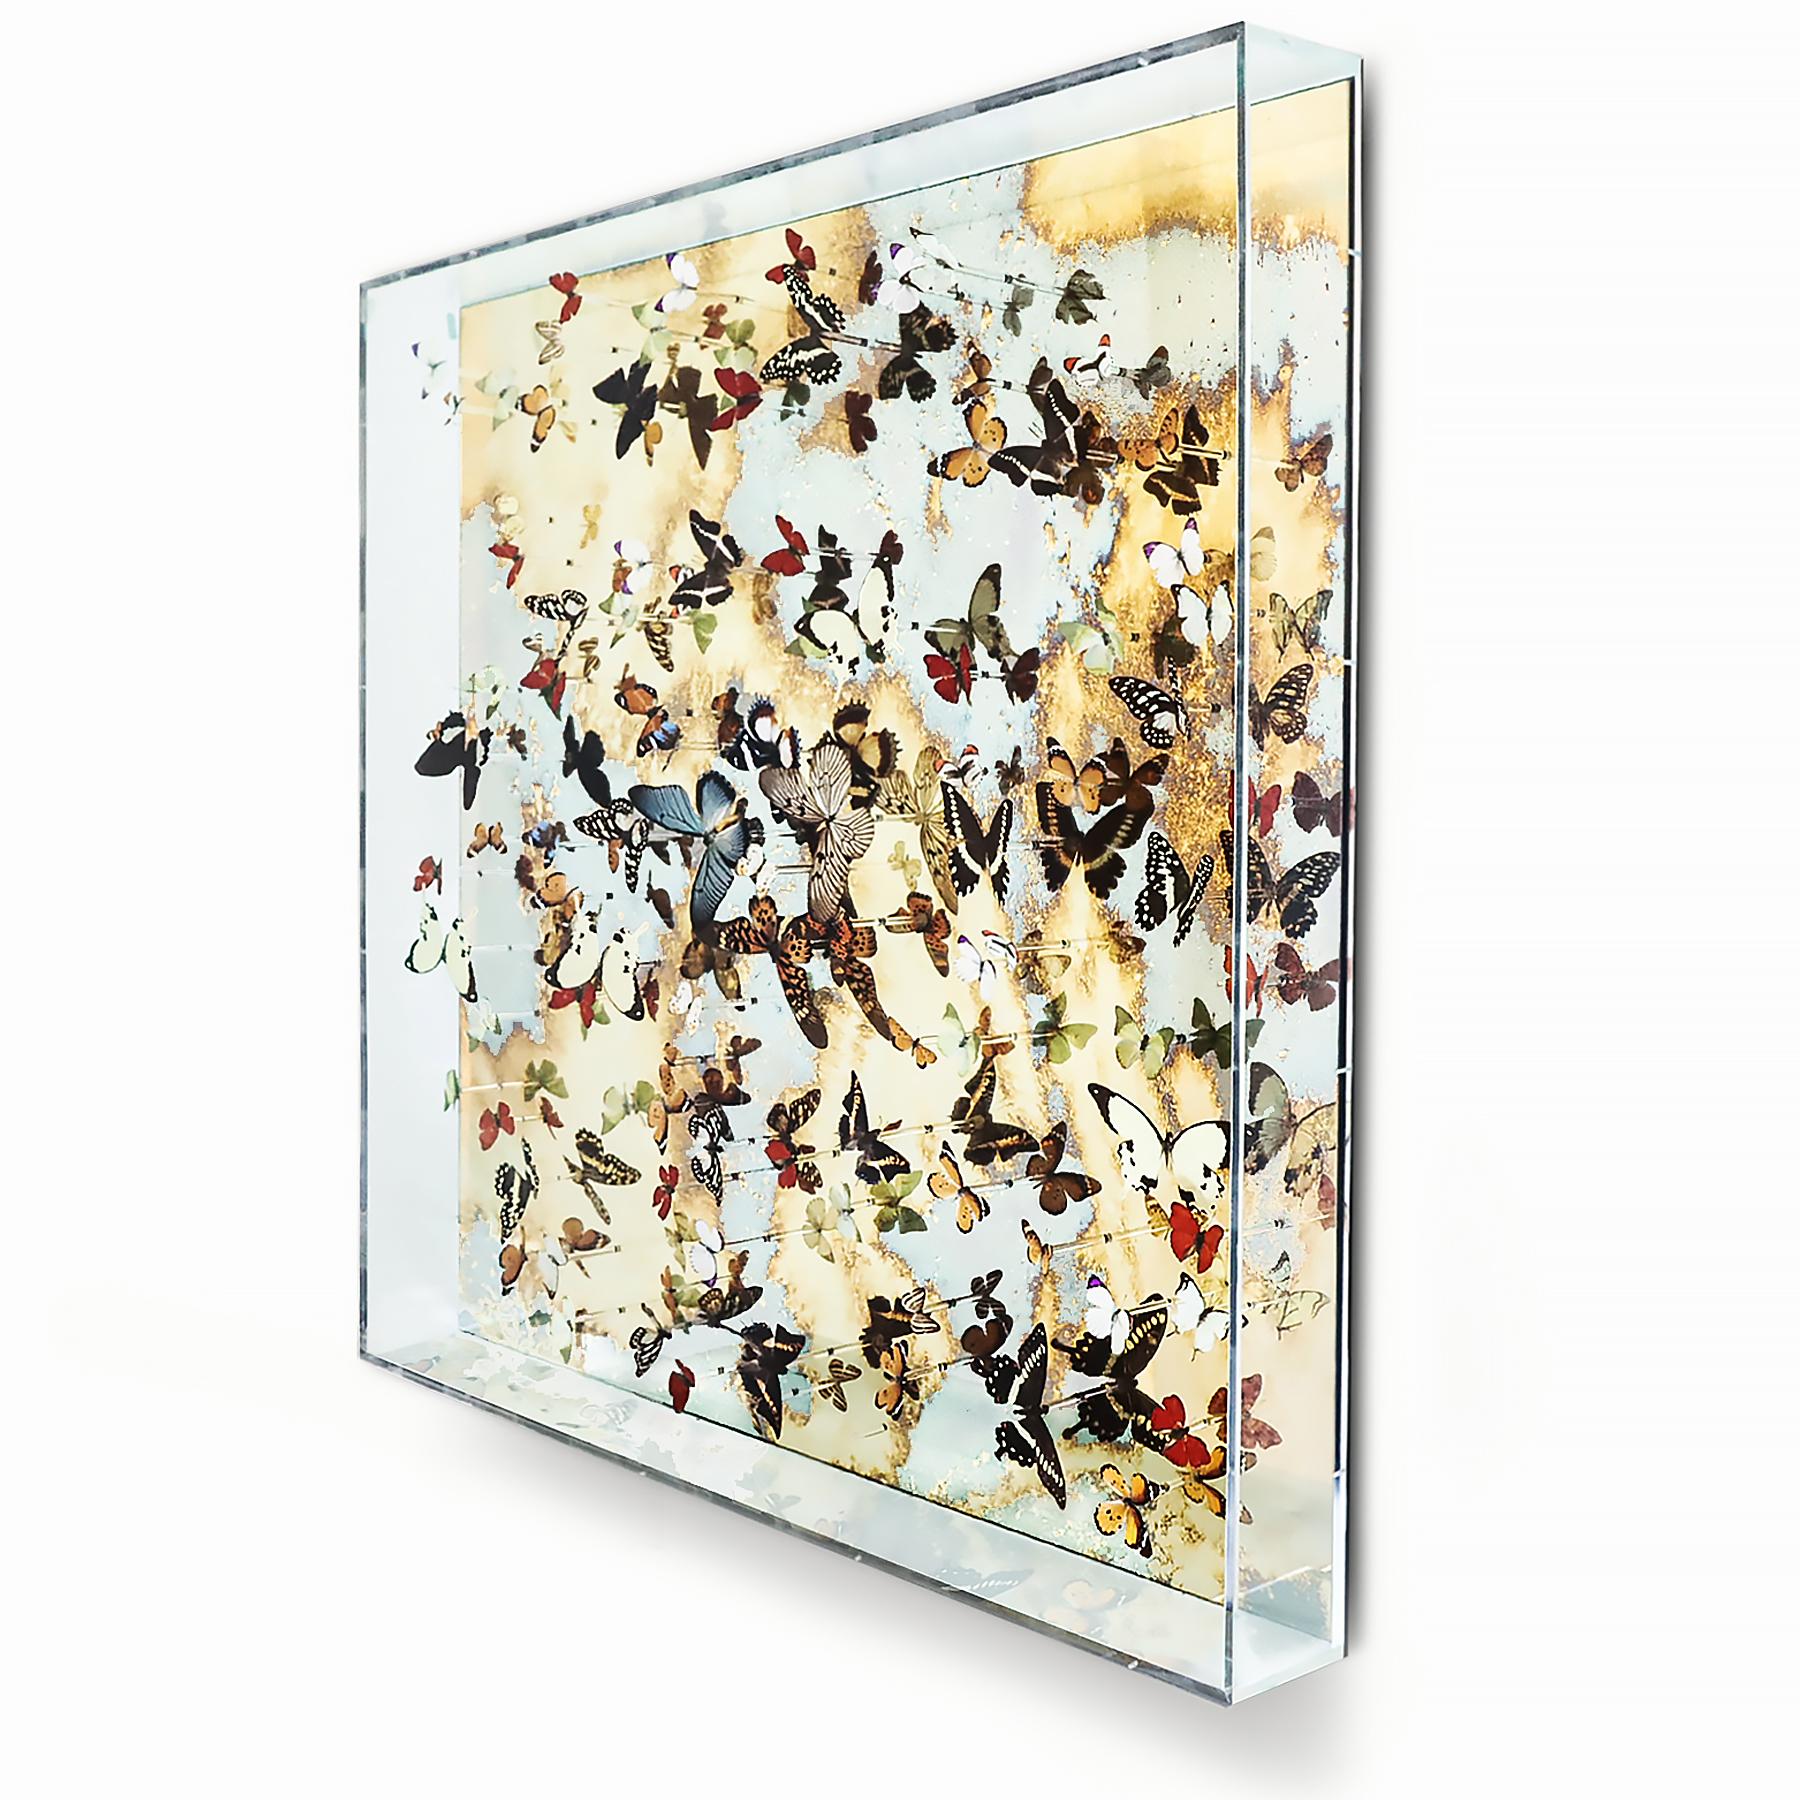 An exceptionally beautiful and unique butterfly artwork installation created by artist Nick Jeffrey.

Set in a bespoke Perspex box this piece features a gold leaf, antiqued mirror as a backdrop for the butterfly installation. Each butterfly is